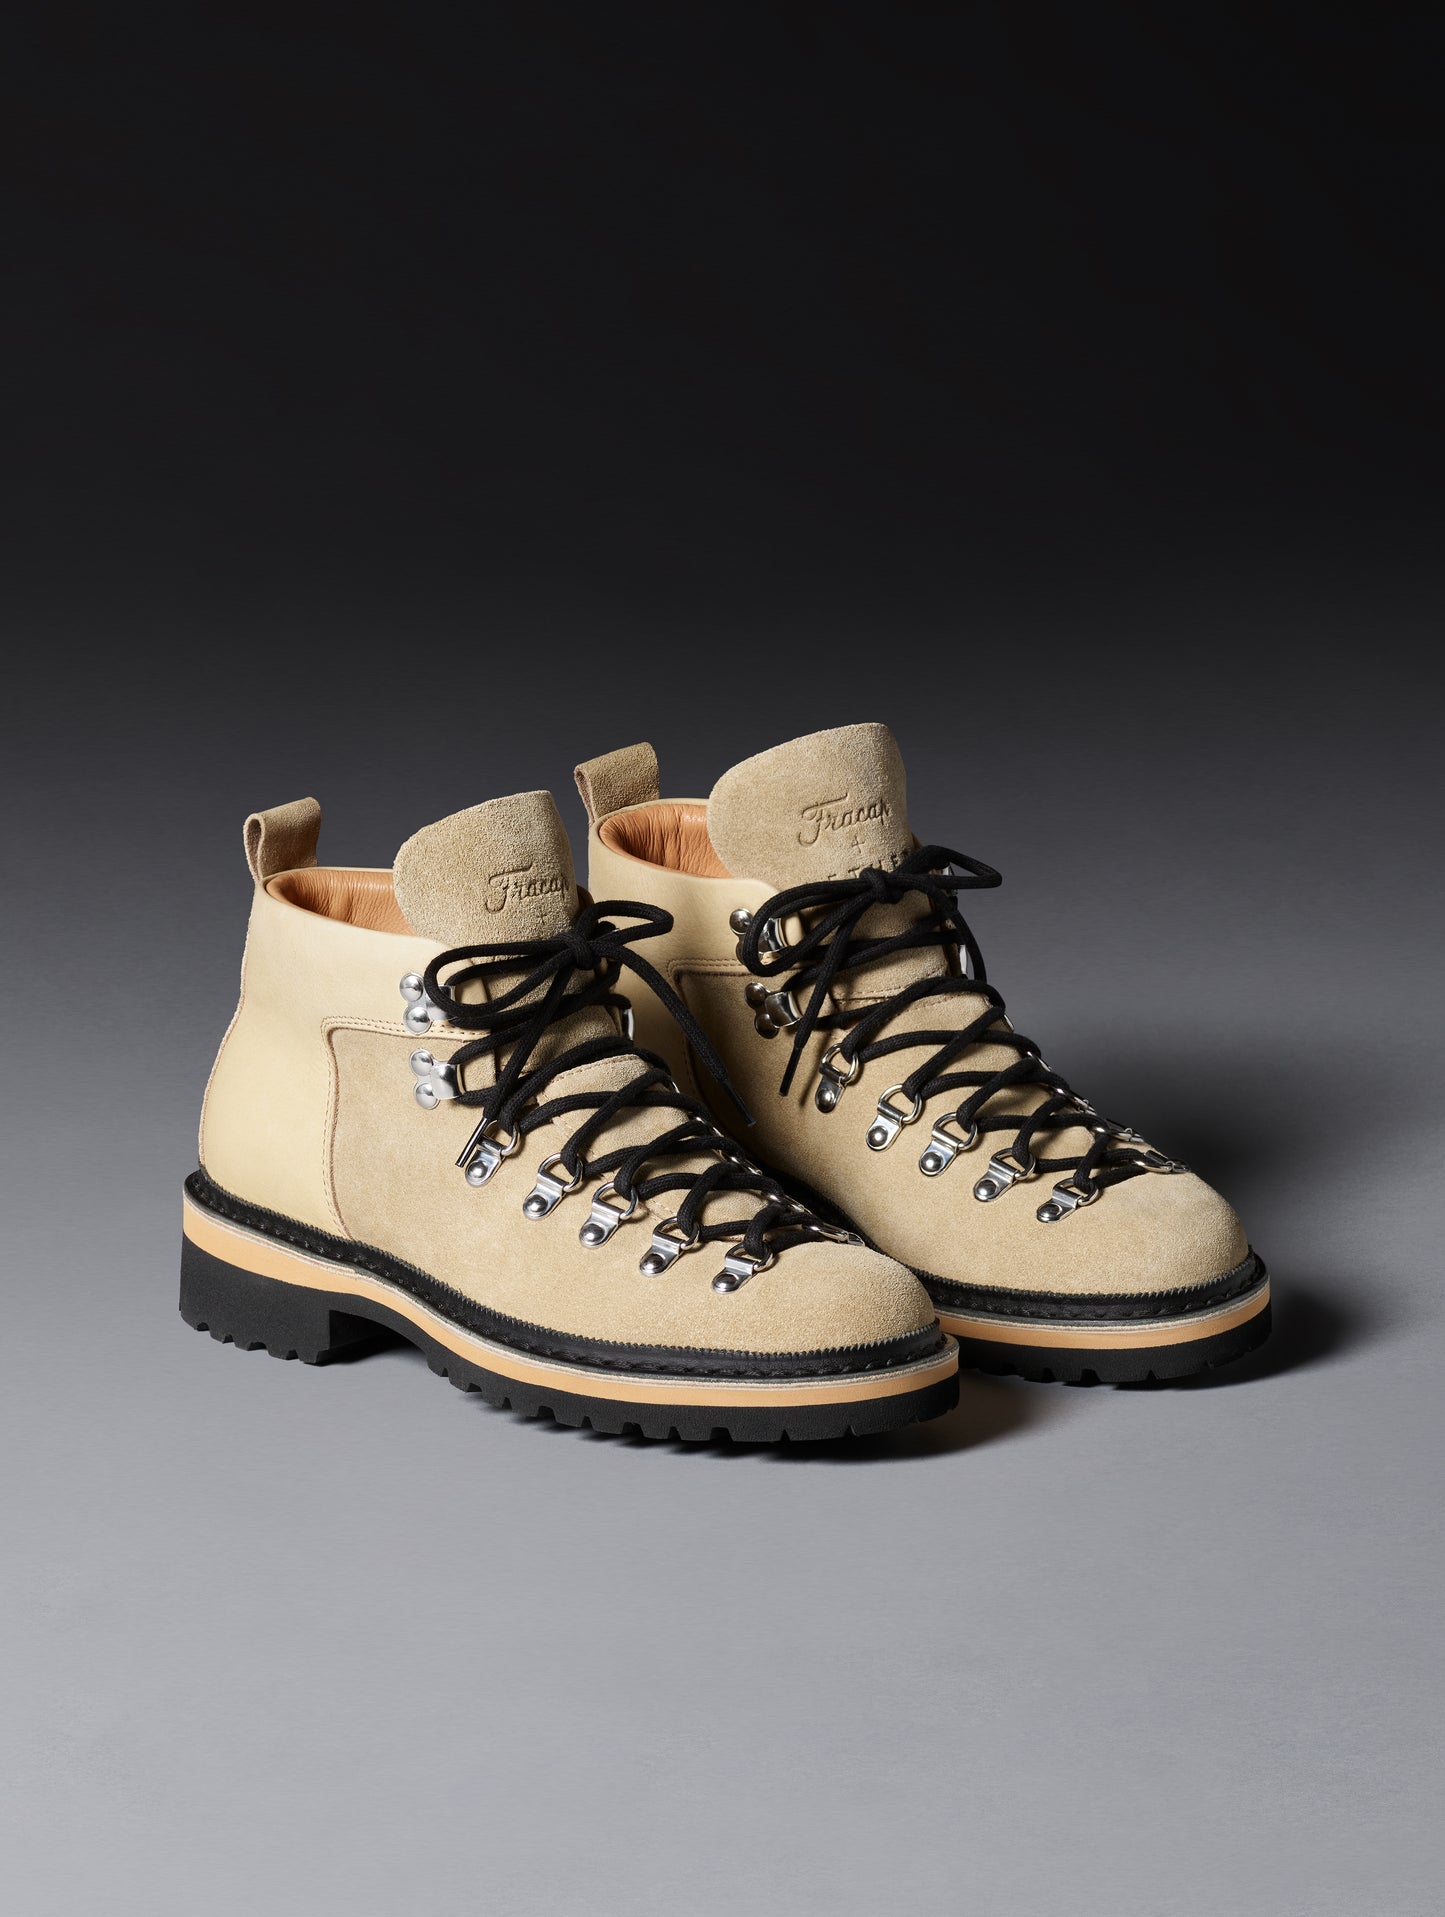 women's beige suede boot from AETHER Apparel